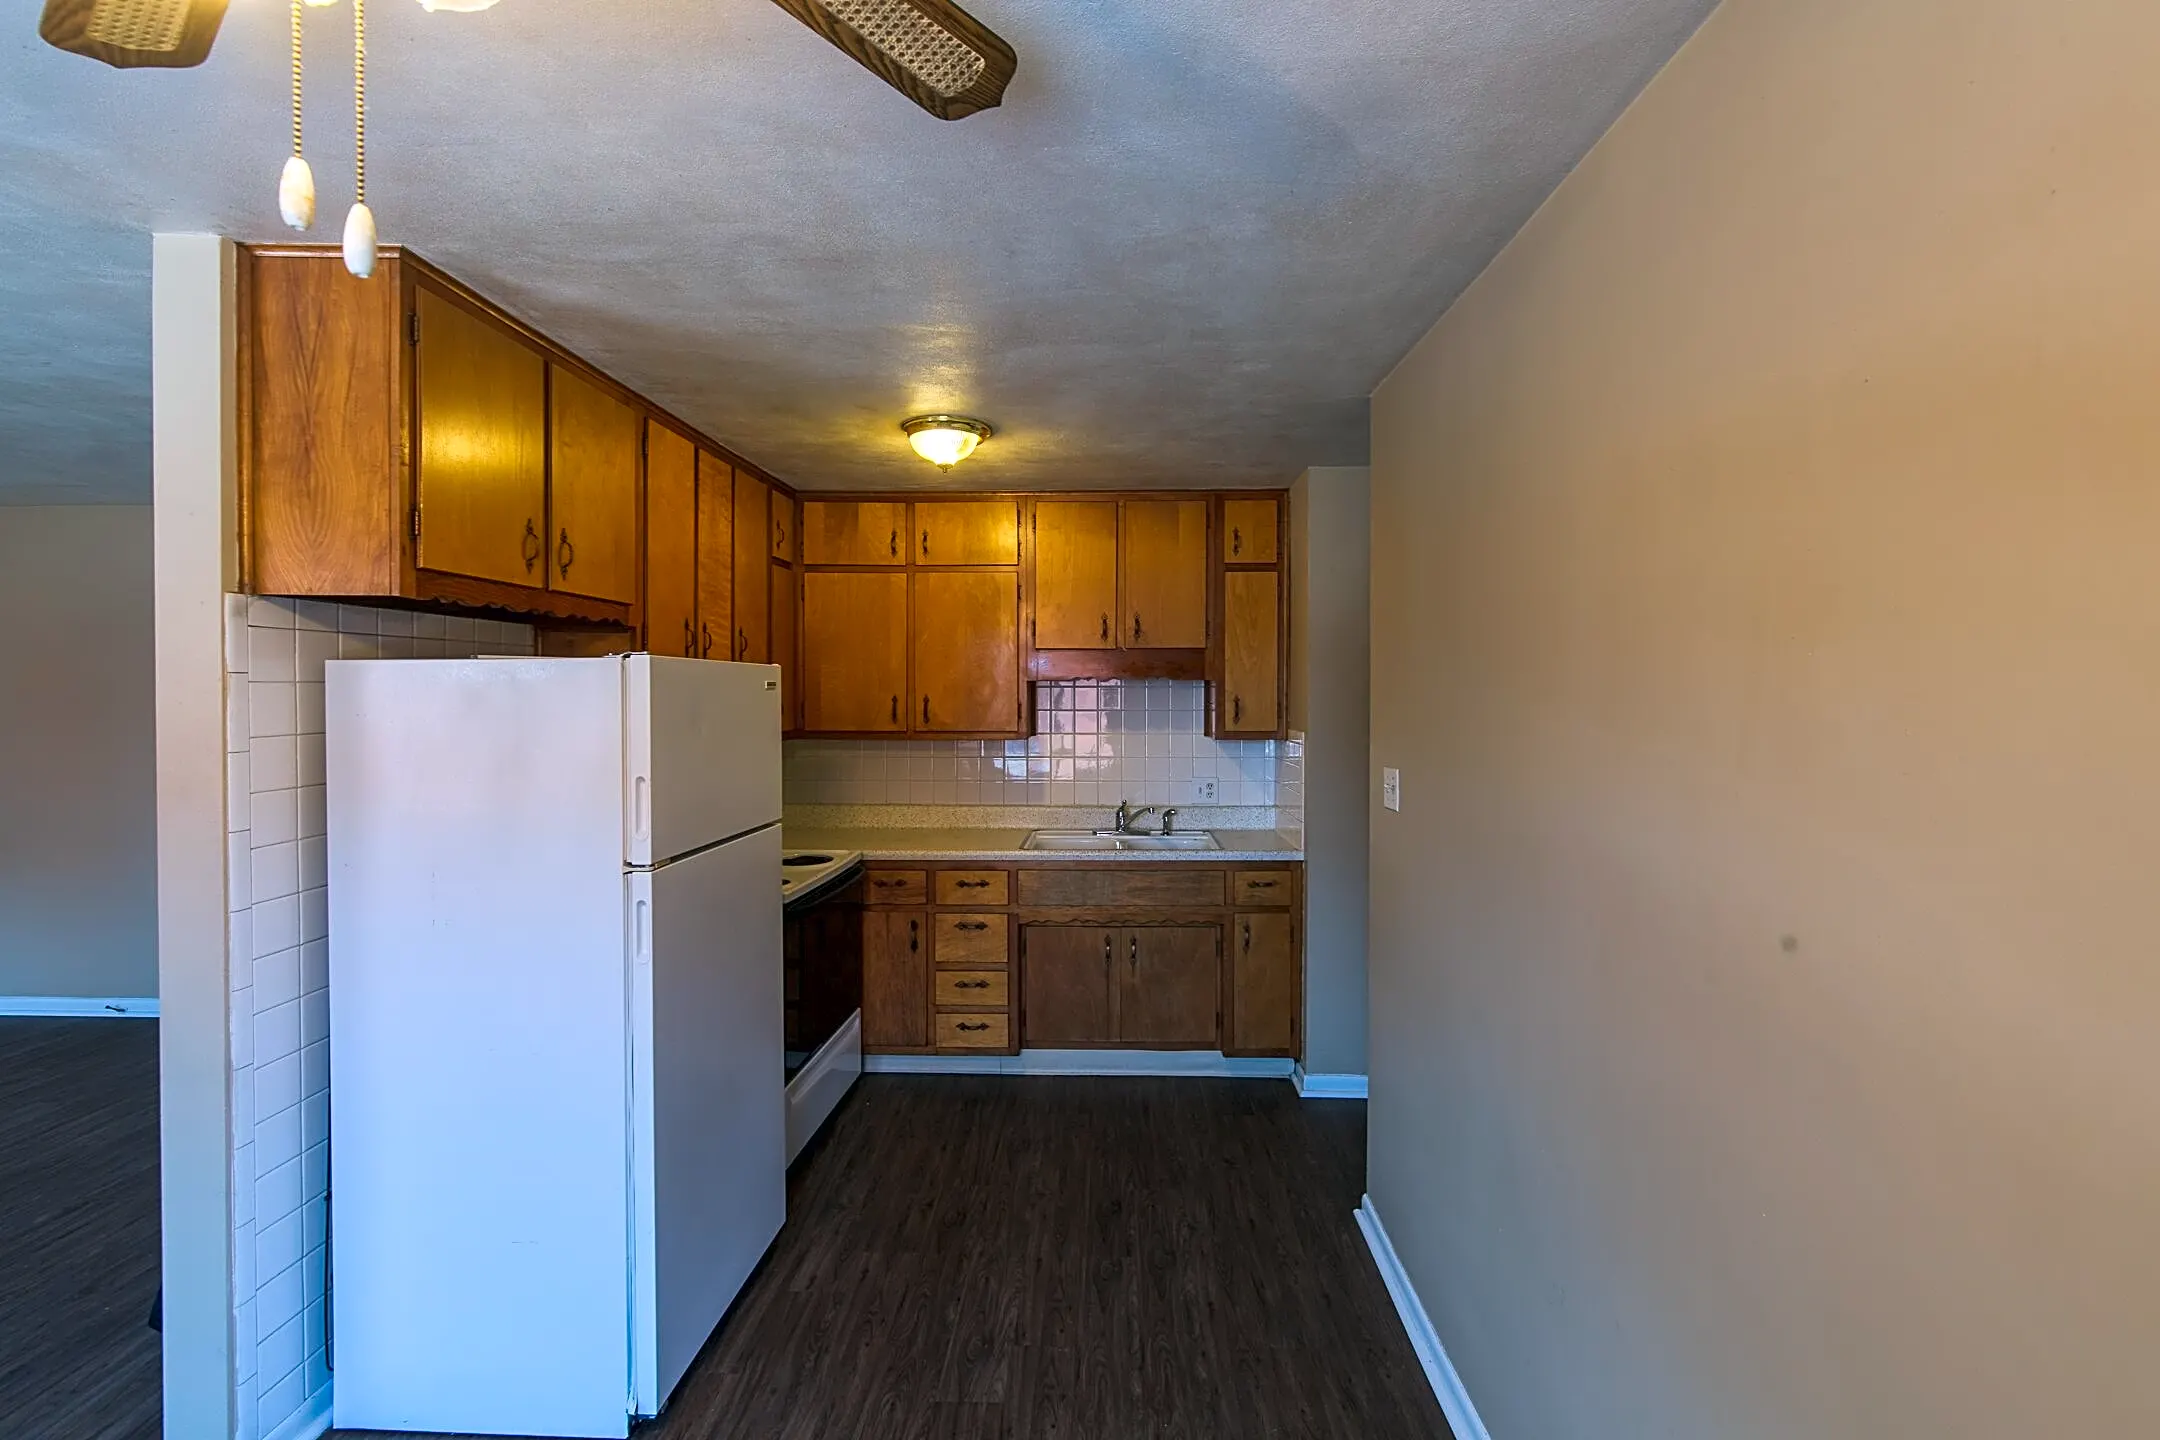 Kitchen - InTempus Property Management - Indianapolis, IN